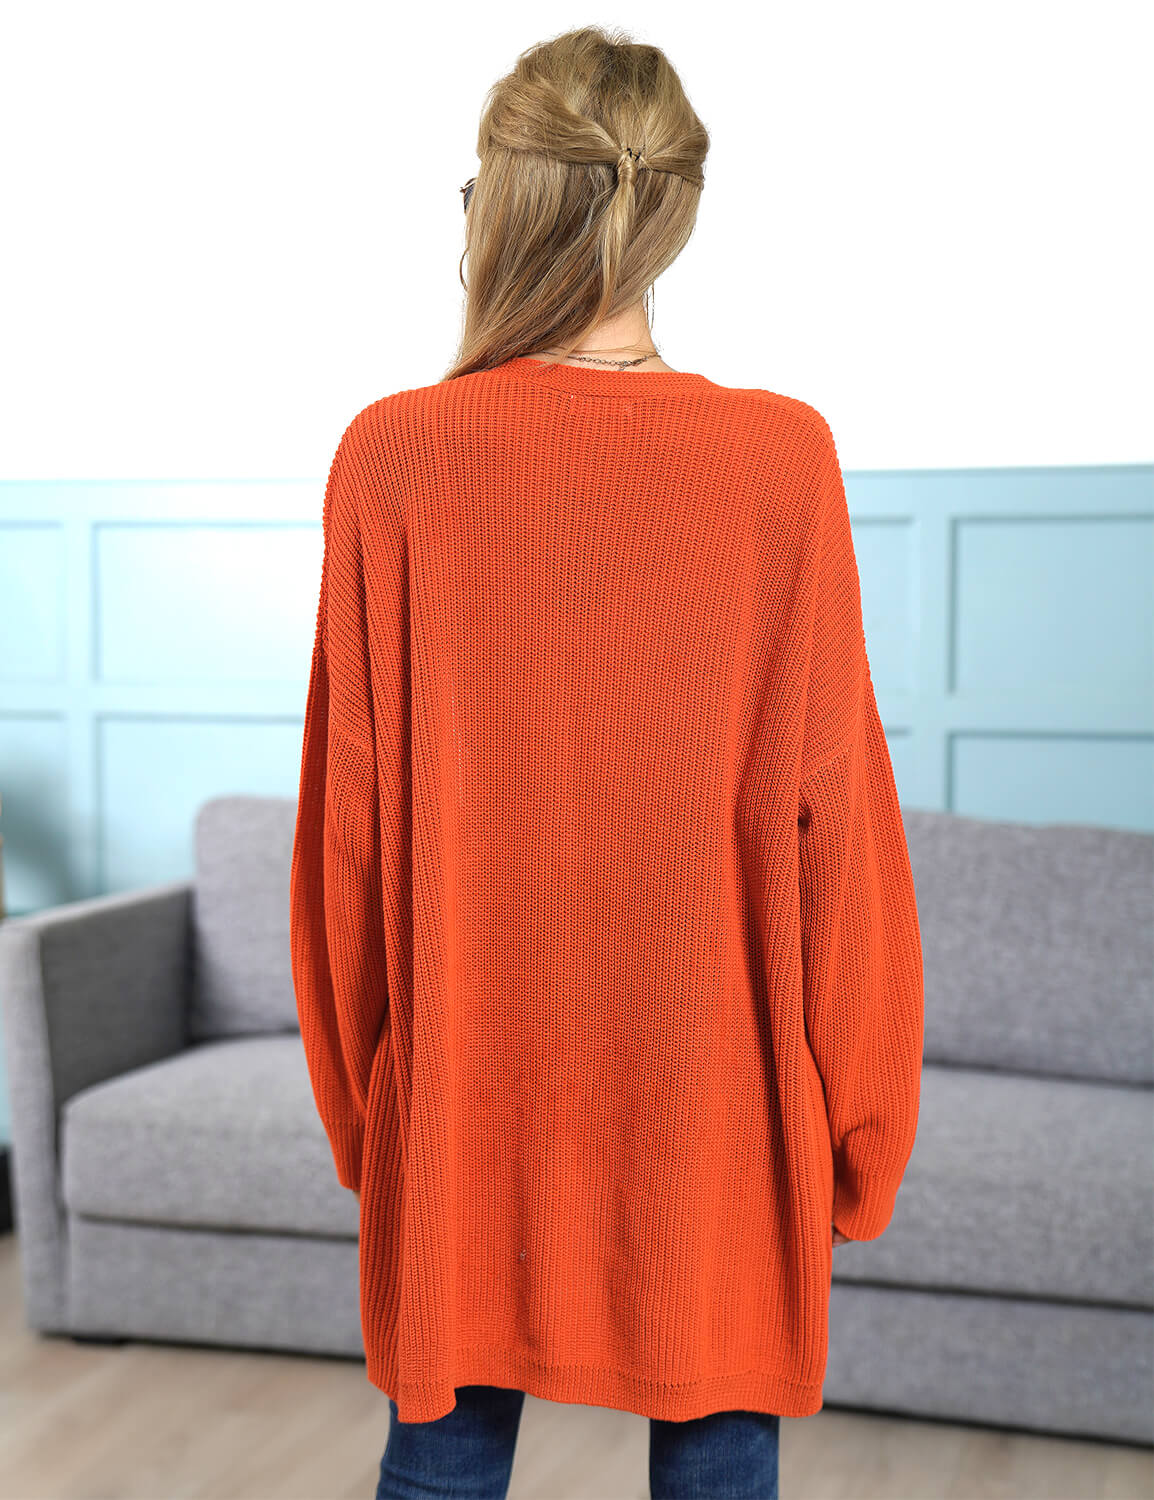 Blooming Jelly_Warm Orange Open Front Cardigan_Orange_295010_29_Women Casual Outfits_Tops_Cardigan